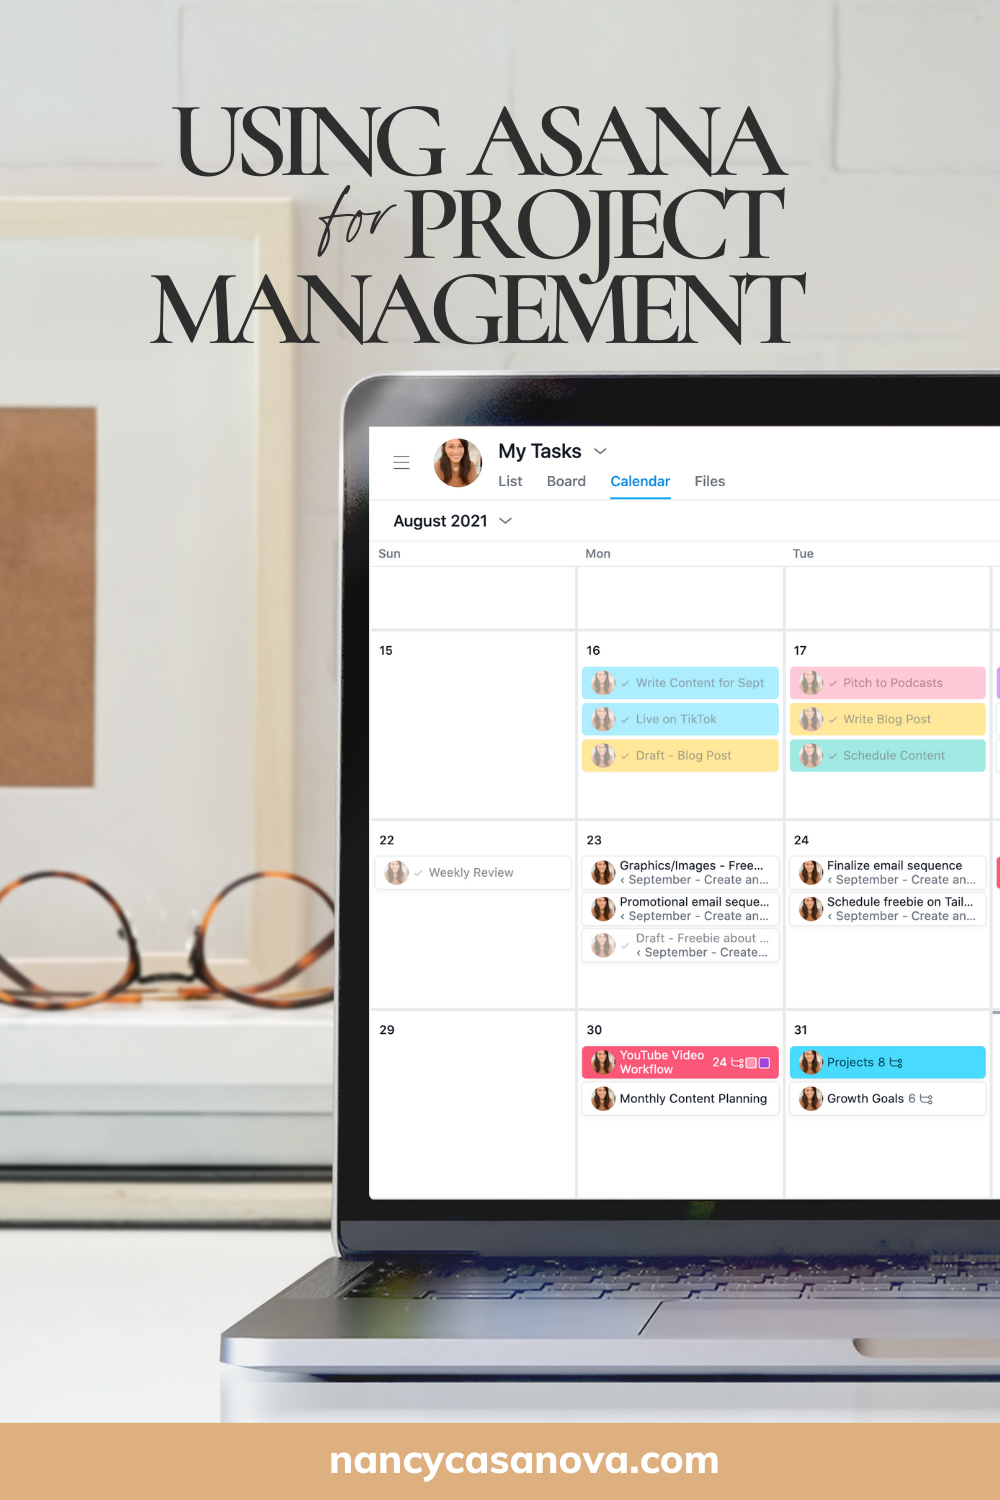 Whether you're working solo or with a team, learn how using Asana for your project management needs can help streamline your business and move your projects and tasks toward completion.
